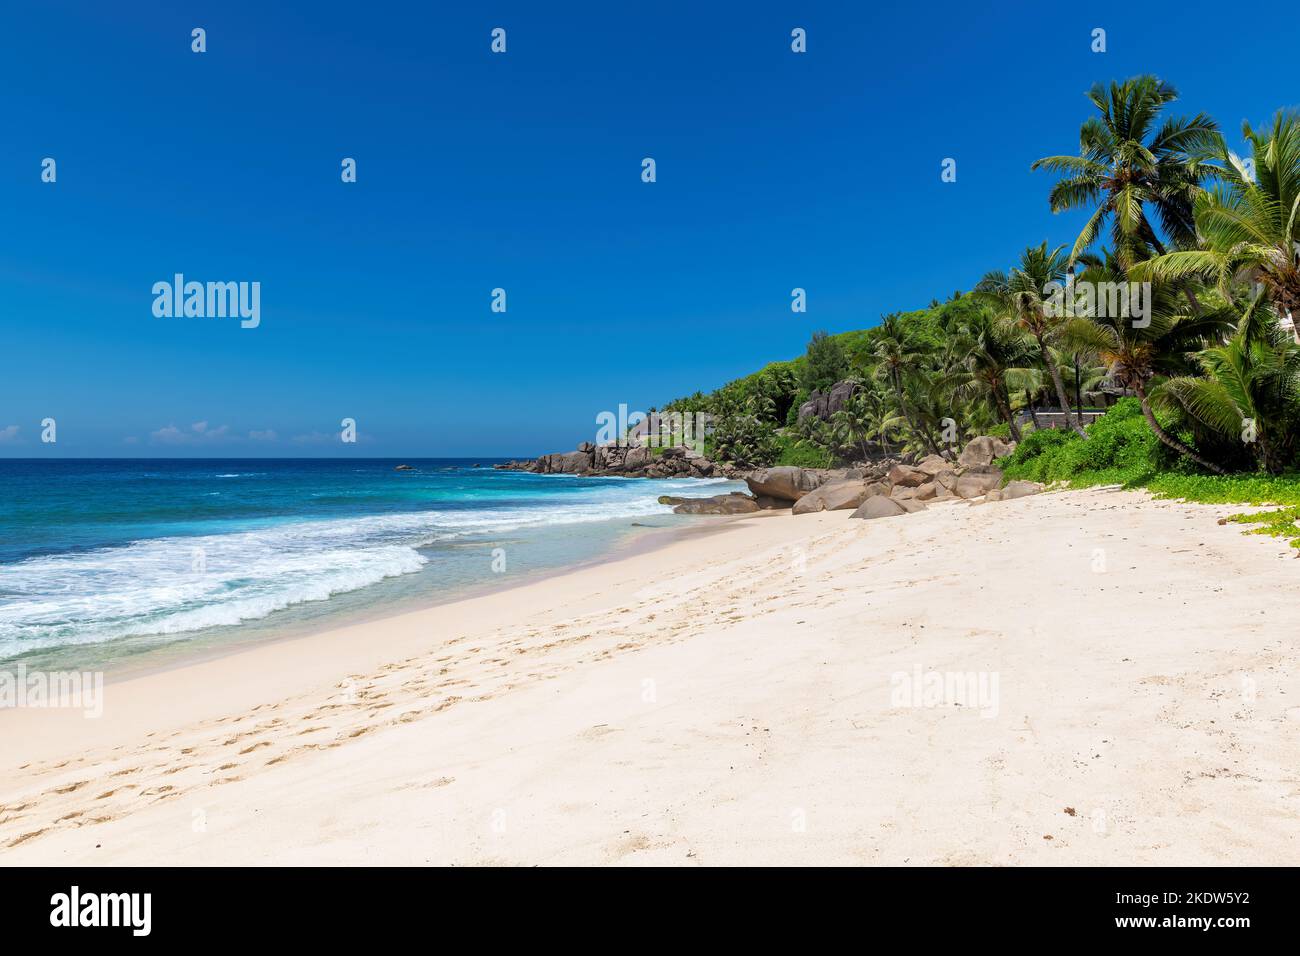 Sandy tropical beach with palms and turquoise sea. Summer vacation and tropical beach concept. Stock Photo